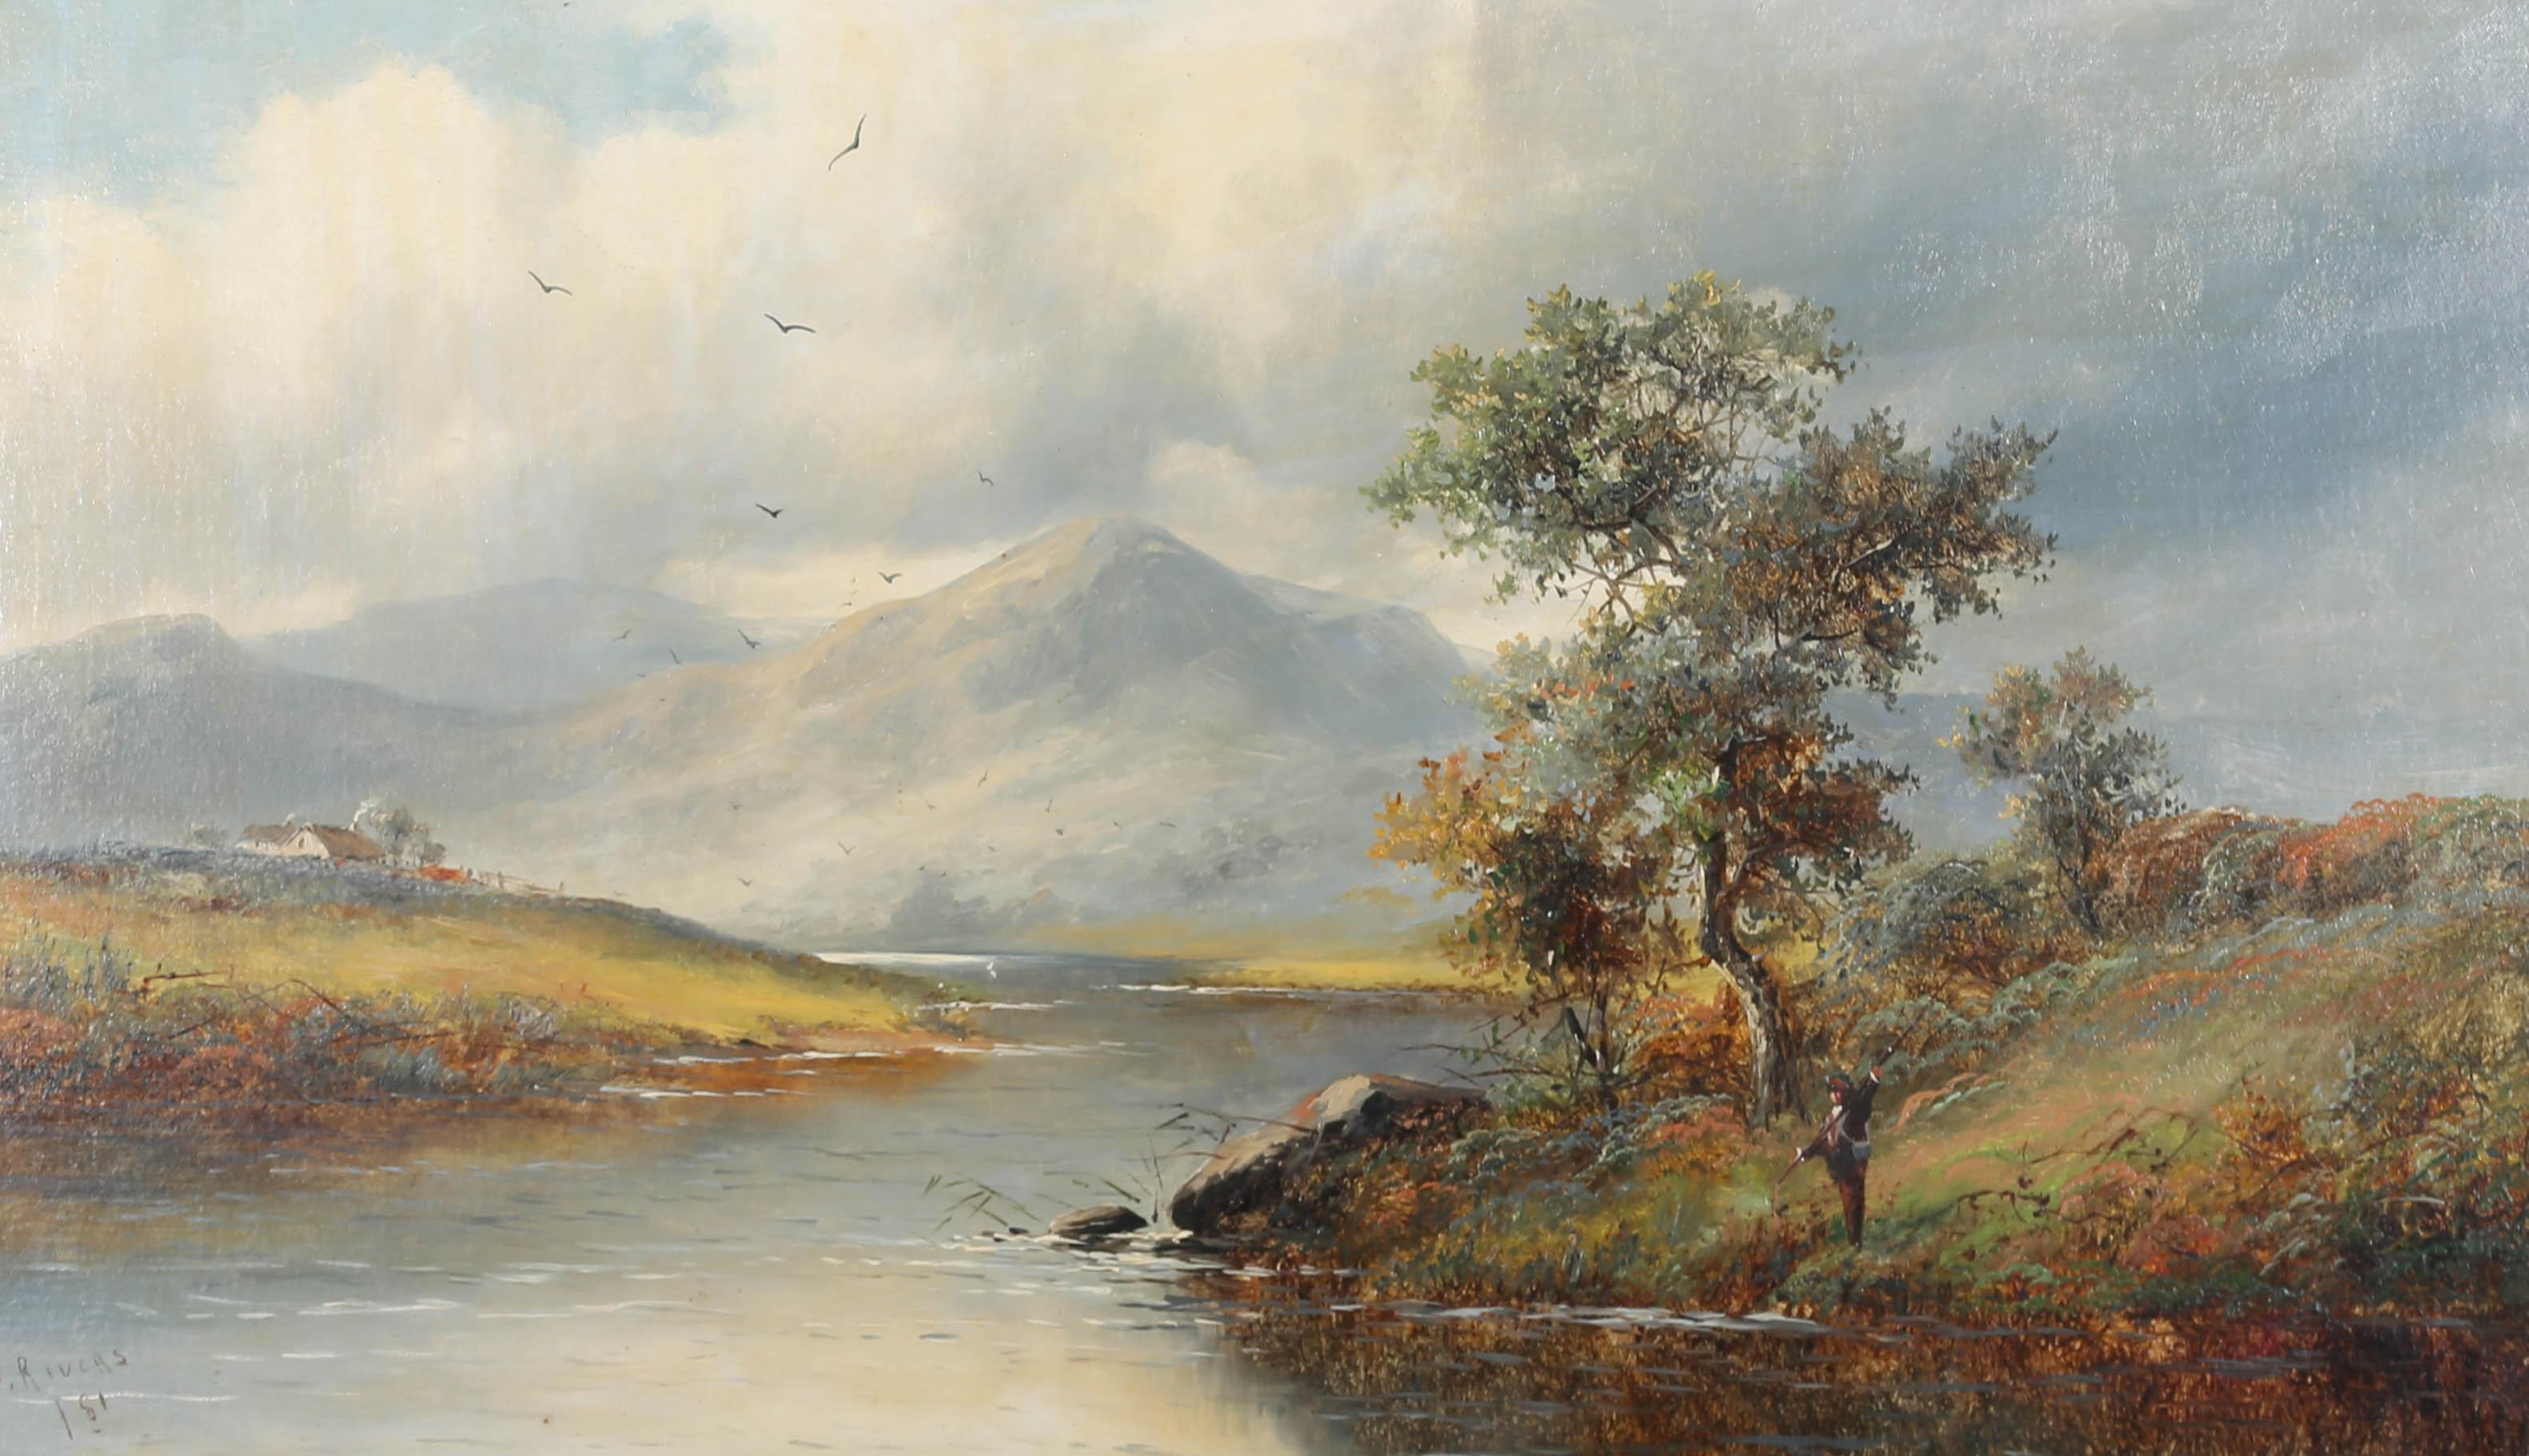 A fine 19th Century landscape showing a figure fishing on the bank of an idyllic meandering river that winds its way towards an imposing mountain range in the distance. The painting has been fully re-lined and the artist has signed and dated to the